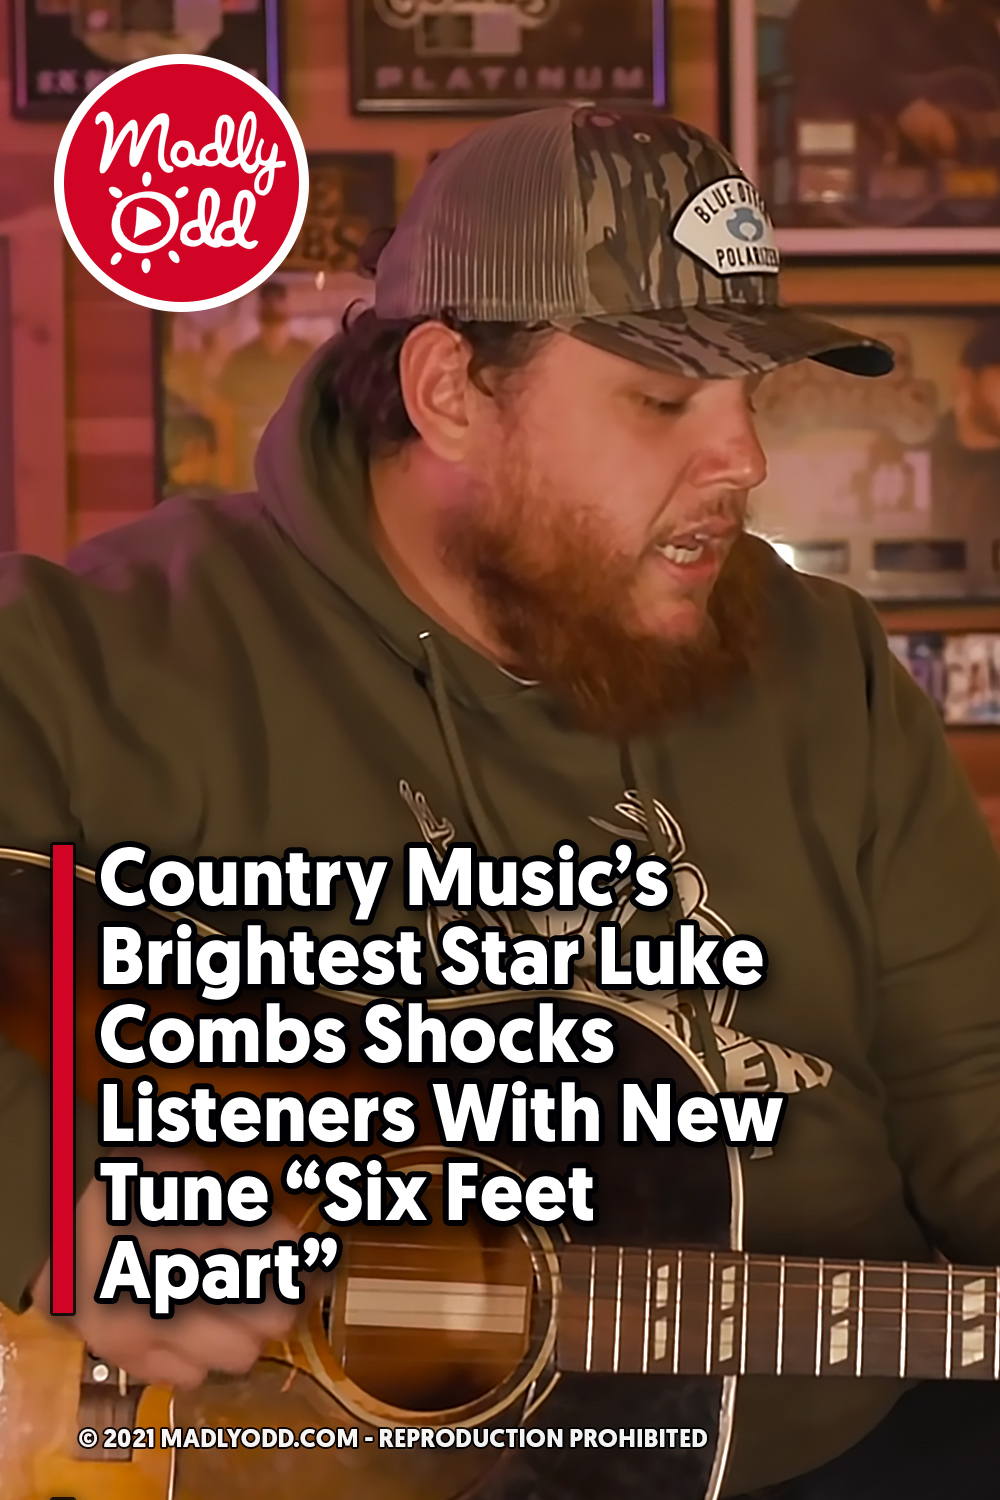 Country Music’s Brightest Star Luke Combs Shocks Listeners With New Tune “Six Feet Apart”